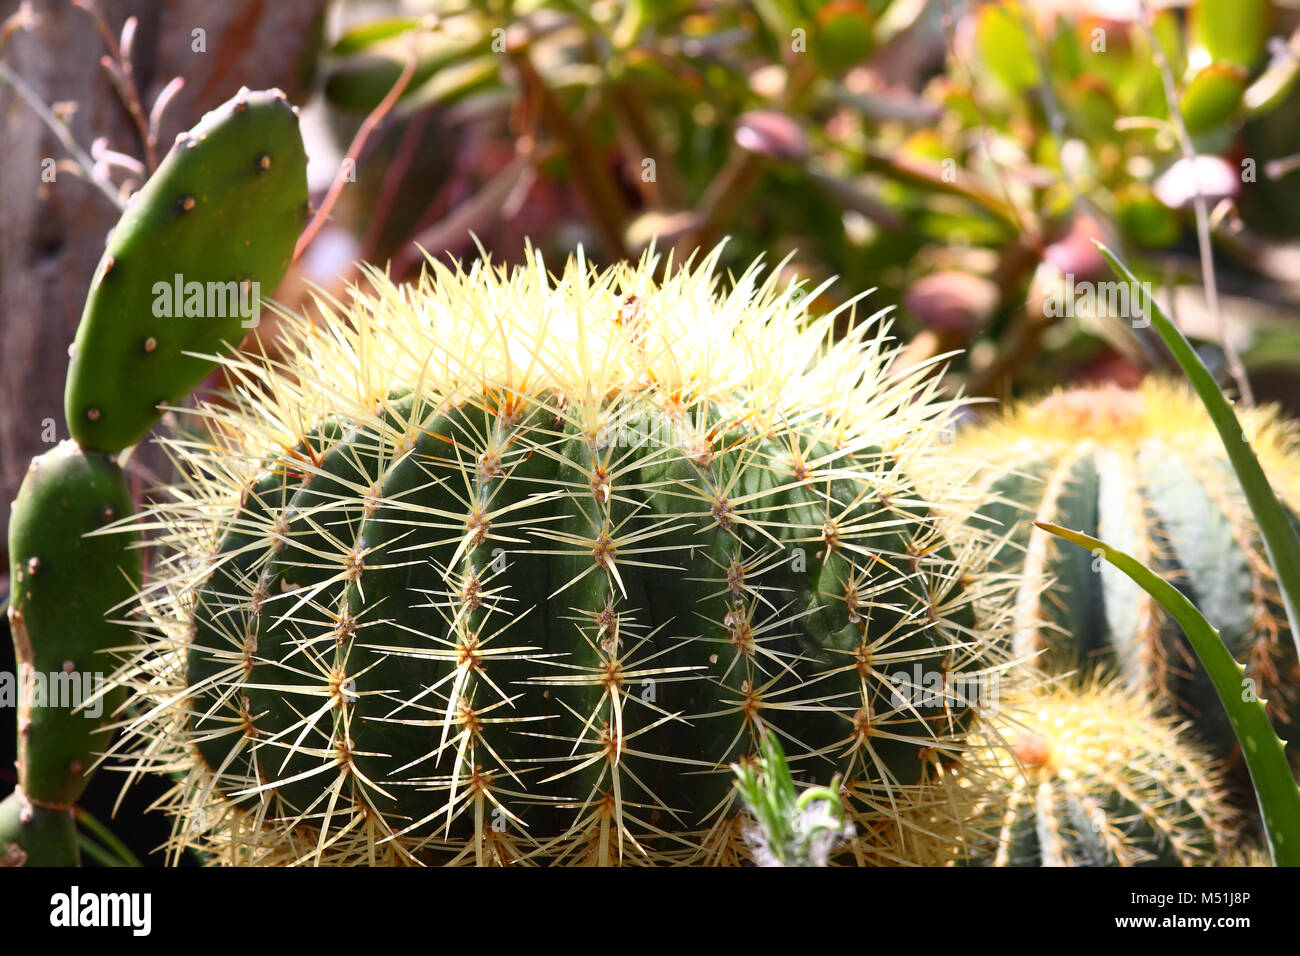 Close up of cactus plants growing Stock Photo